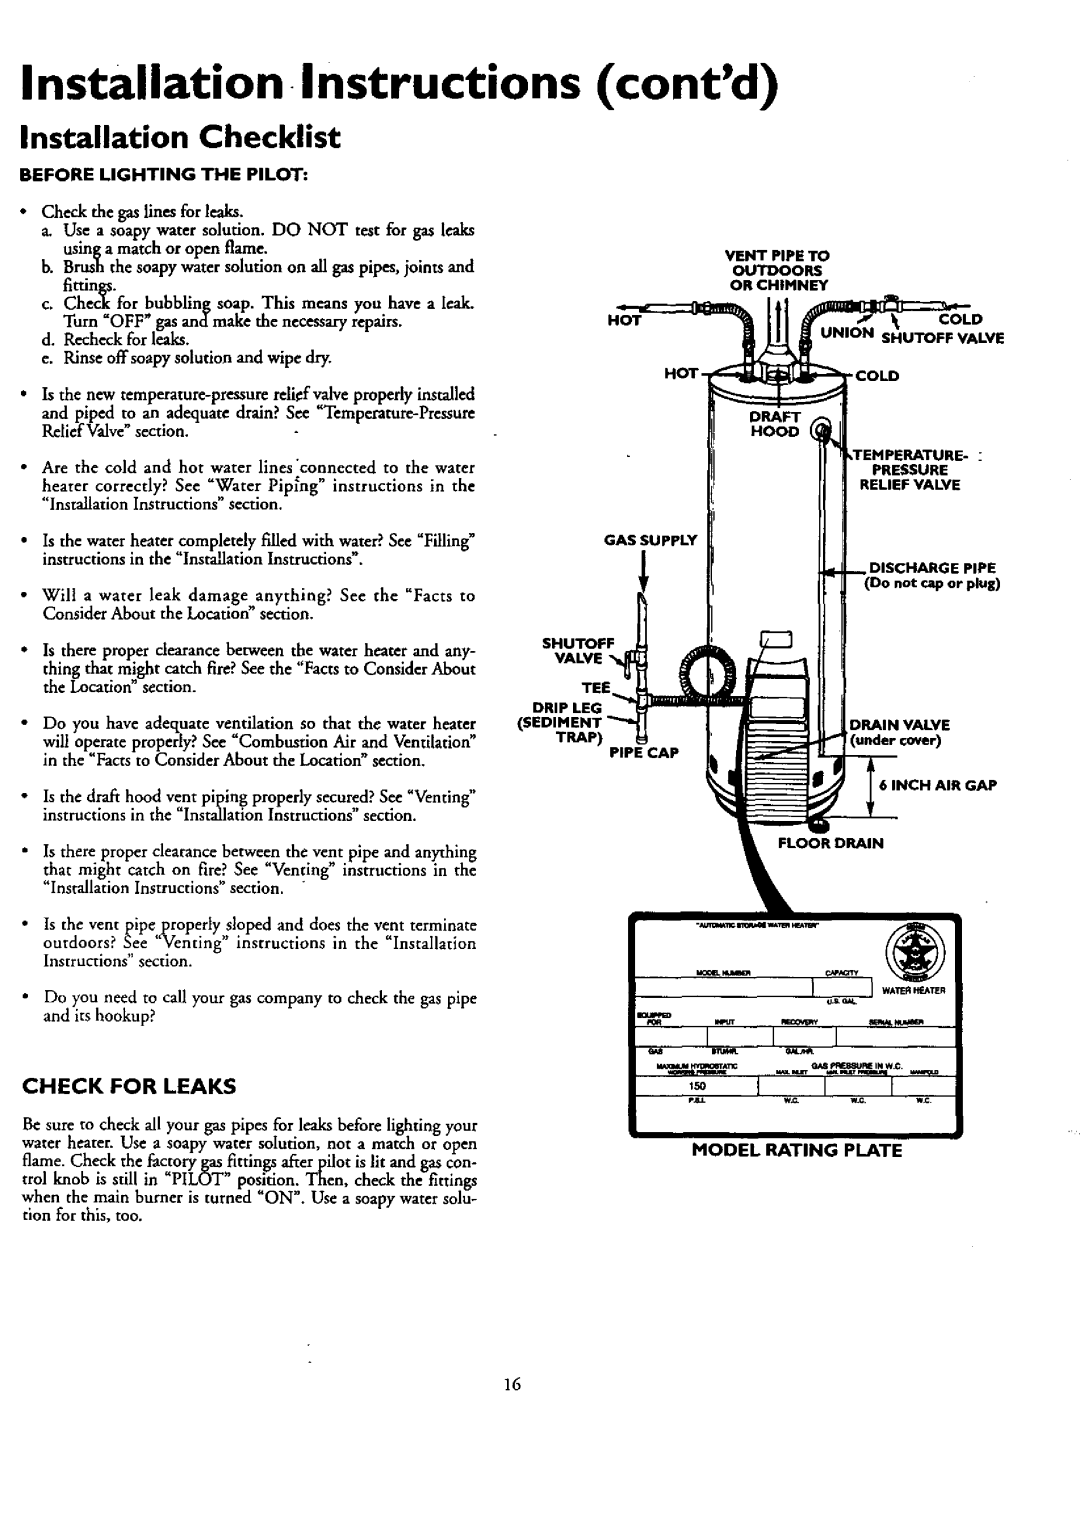 Kenmore 153.330401 contd, Installation Checklist, Installation Instructions, Check the gas lines for leaks, fittings 